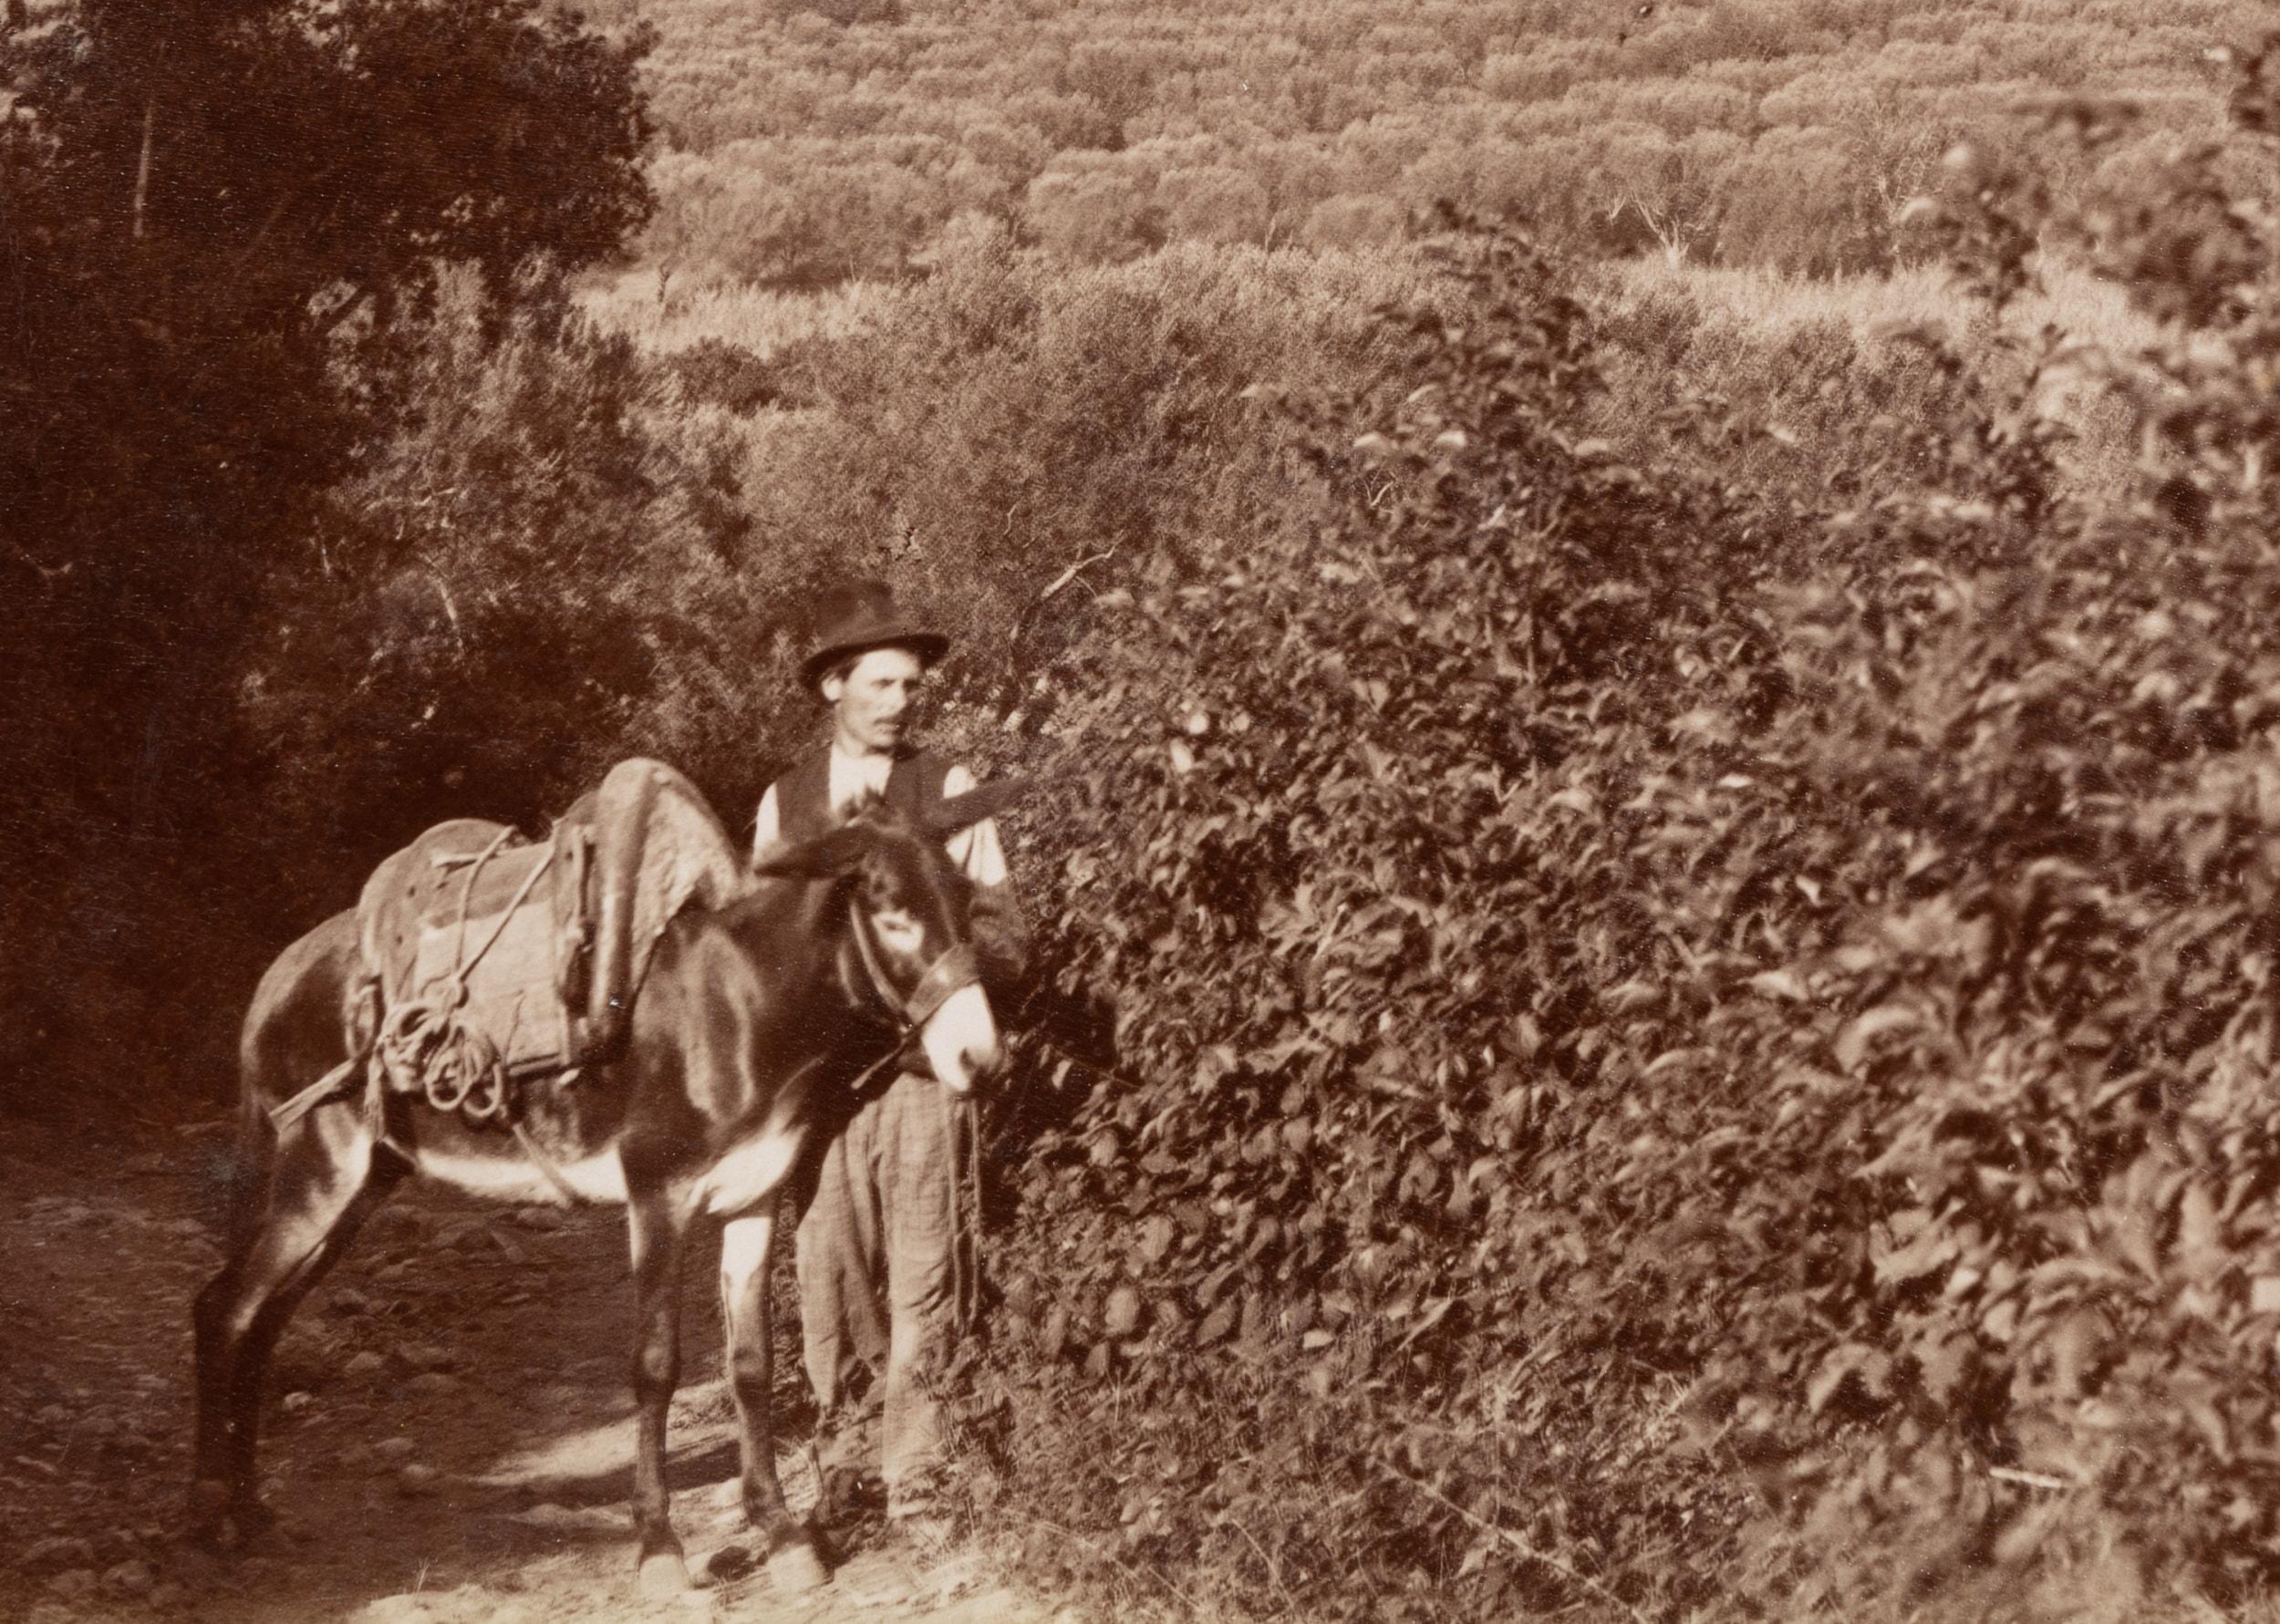 Domenico Anderson (1854 Rom - 1938 ibid.) Circle: Farmer with donkey in the landscape of the Alban Hills, c. 1880, albumen paper print

Technique: albumen paper print, mounted on Cardboard

Inscription: Lower middle inscribed on the support: 